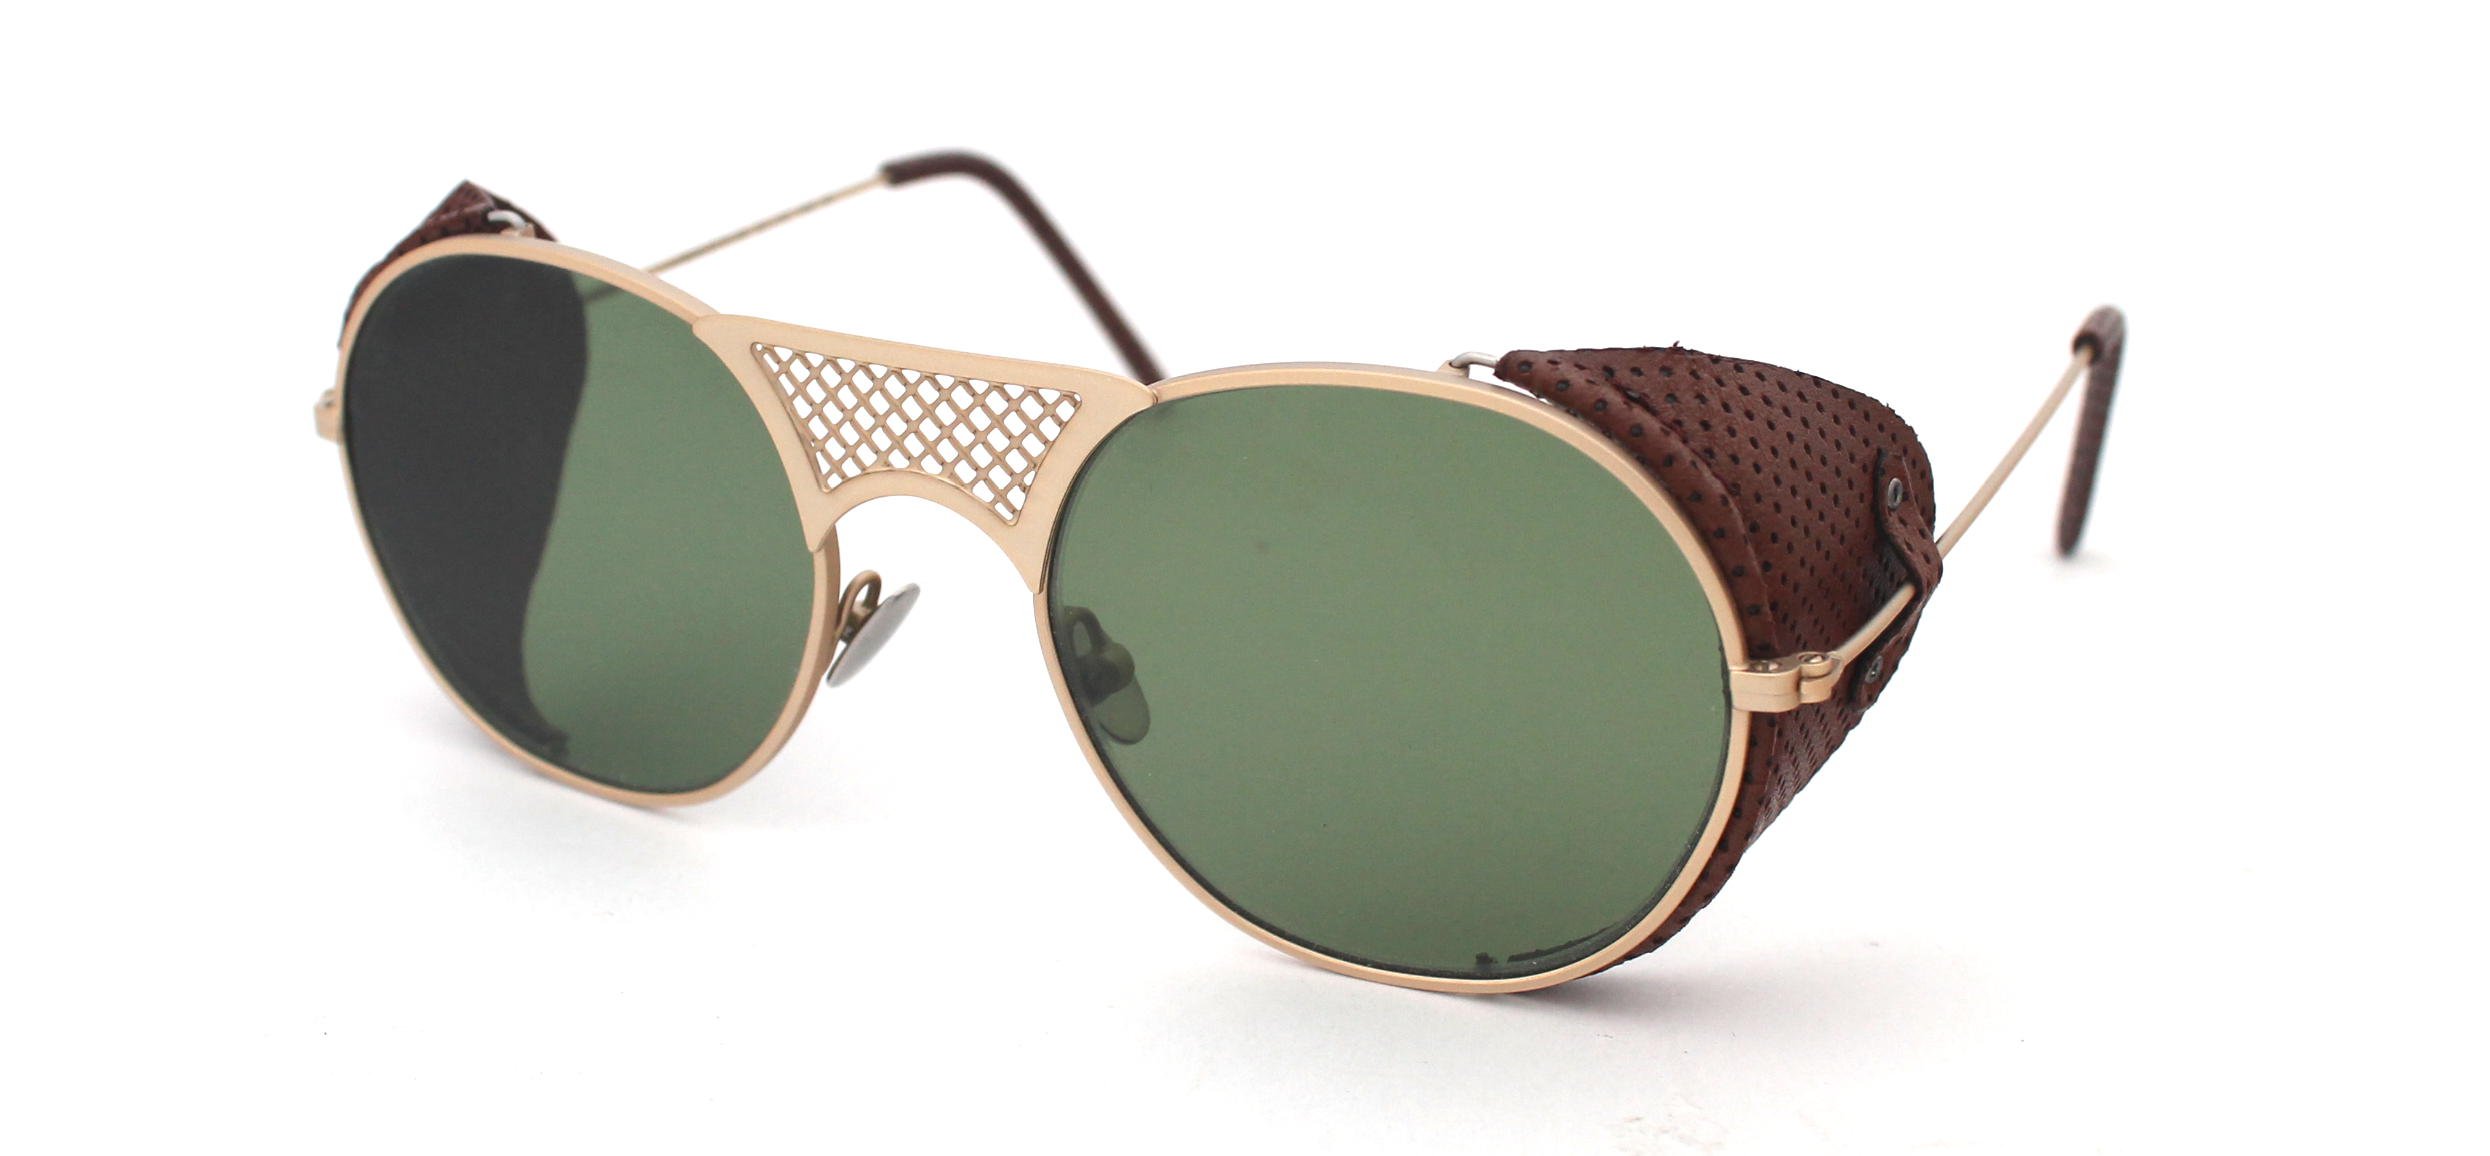 L.G.R is one of the best brands for men's sunglasses